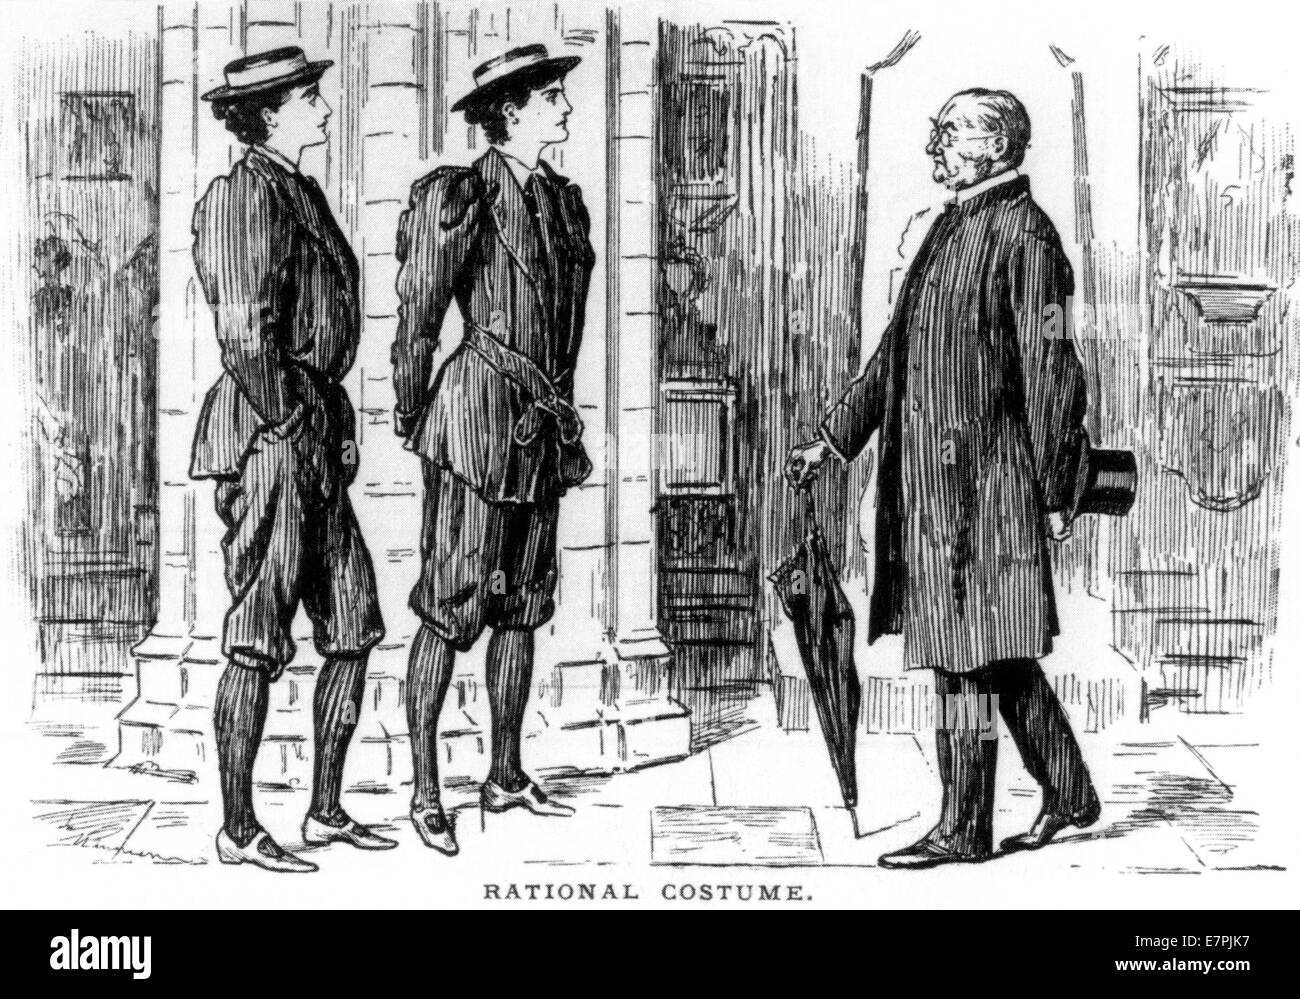 CYCLING DRESS A Vicar is confused by women cyclists refusing to remove their hats in this 1896 Punch cartoon - see Description Stock Photo